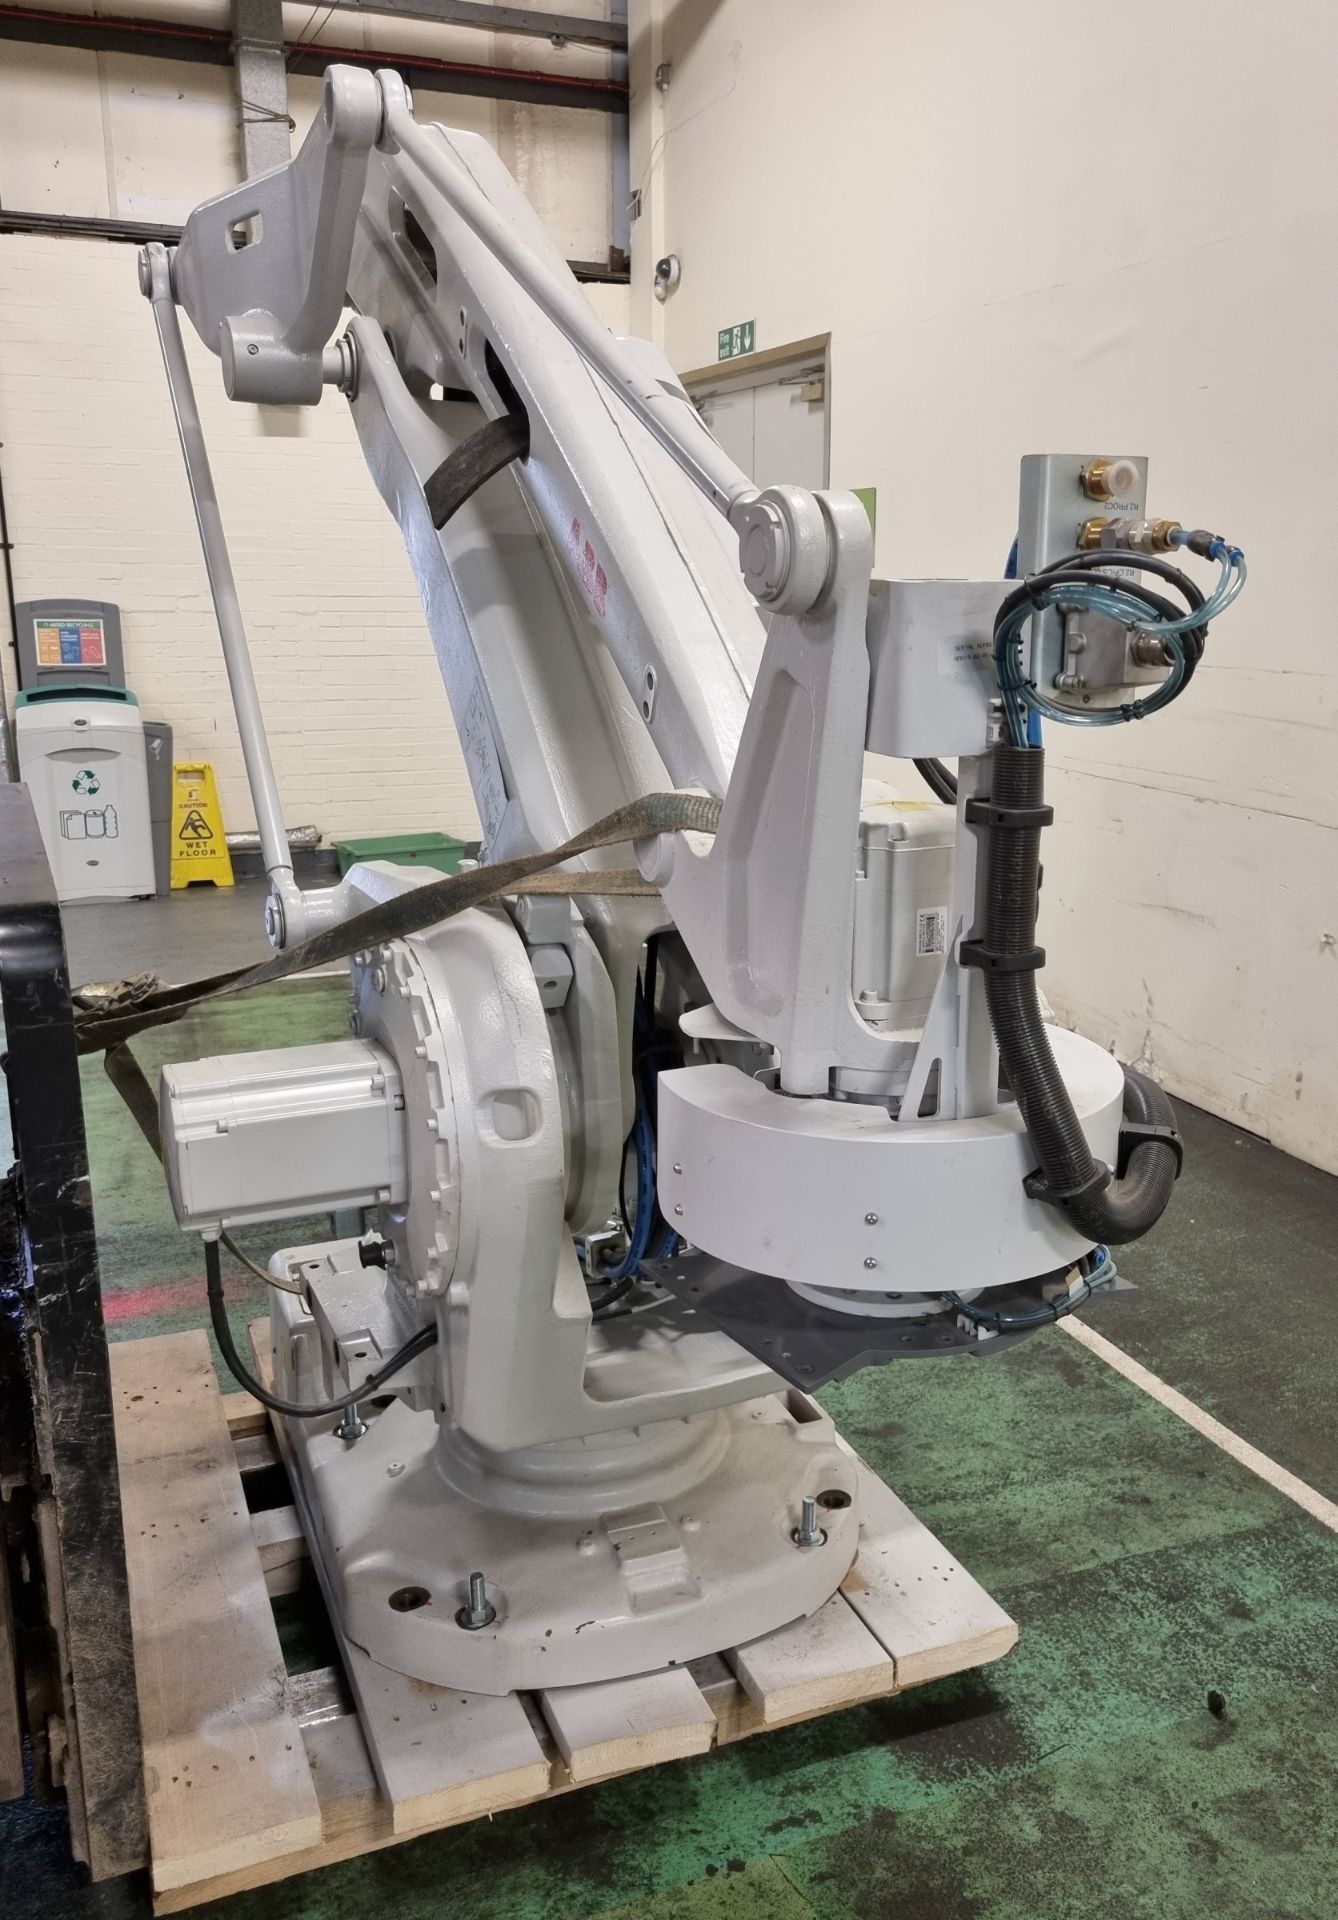 ABB AB IRB 660 4 axis articulated robot arm with ABB IRC5 Single robot control panel - Image 8 of 55